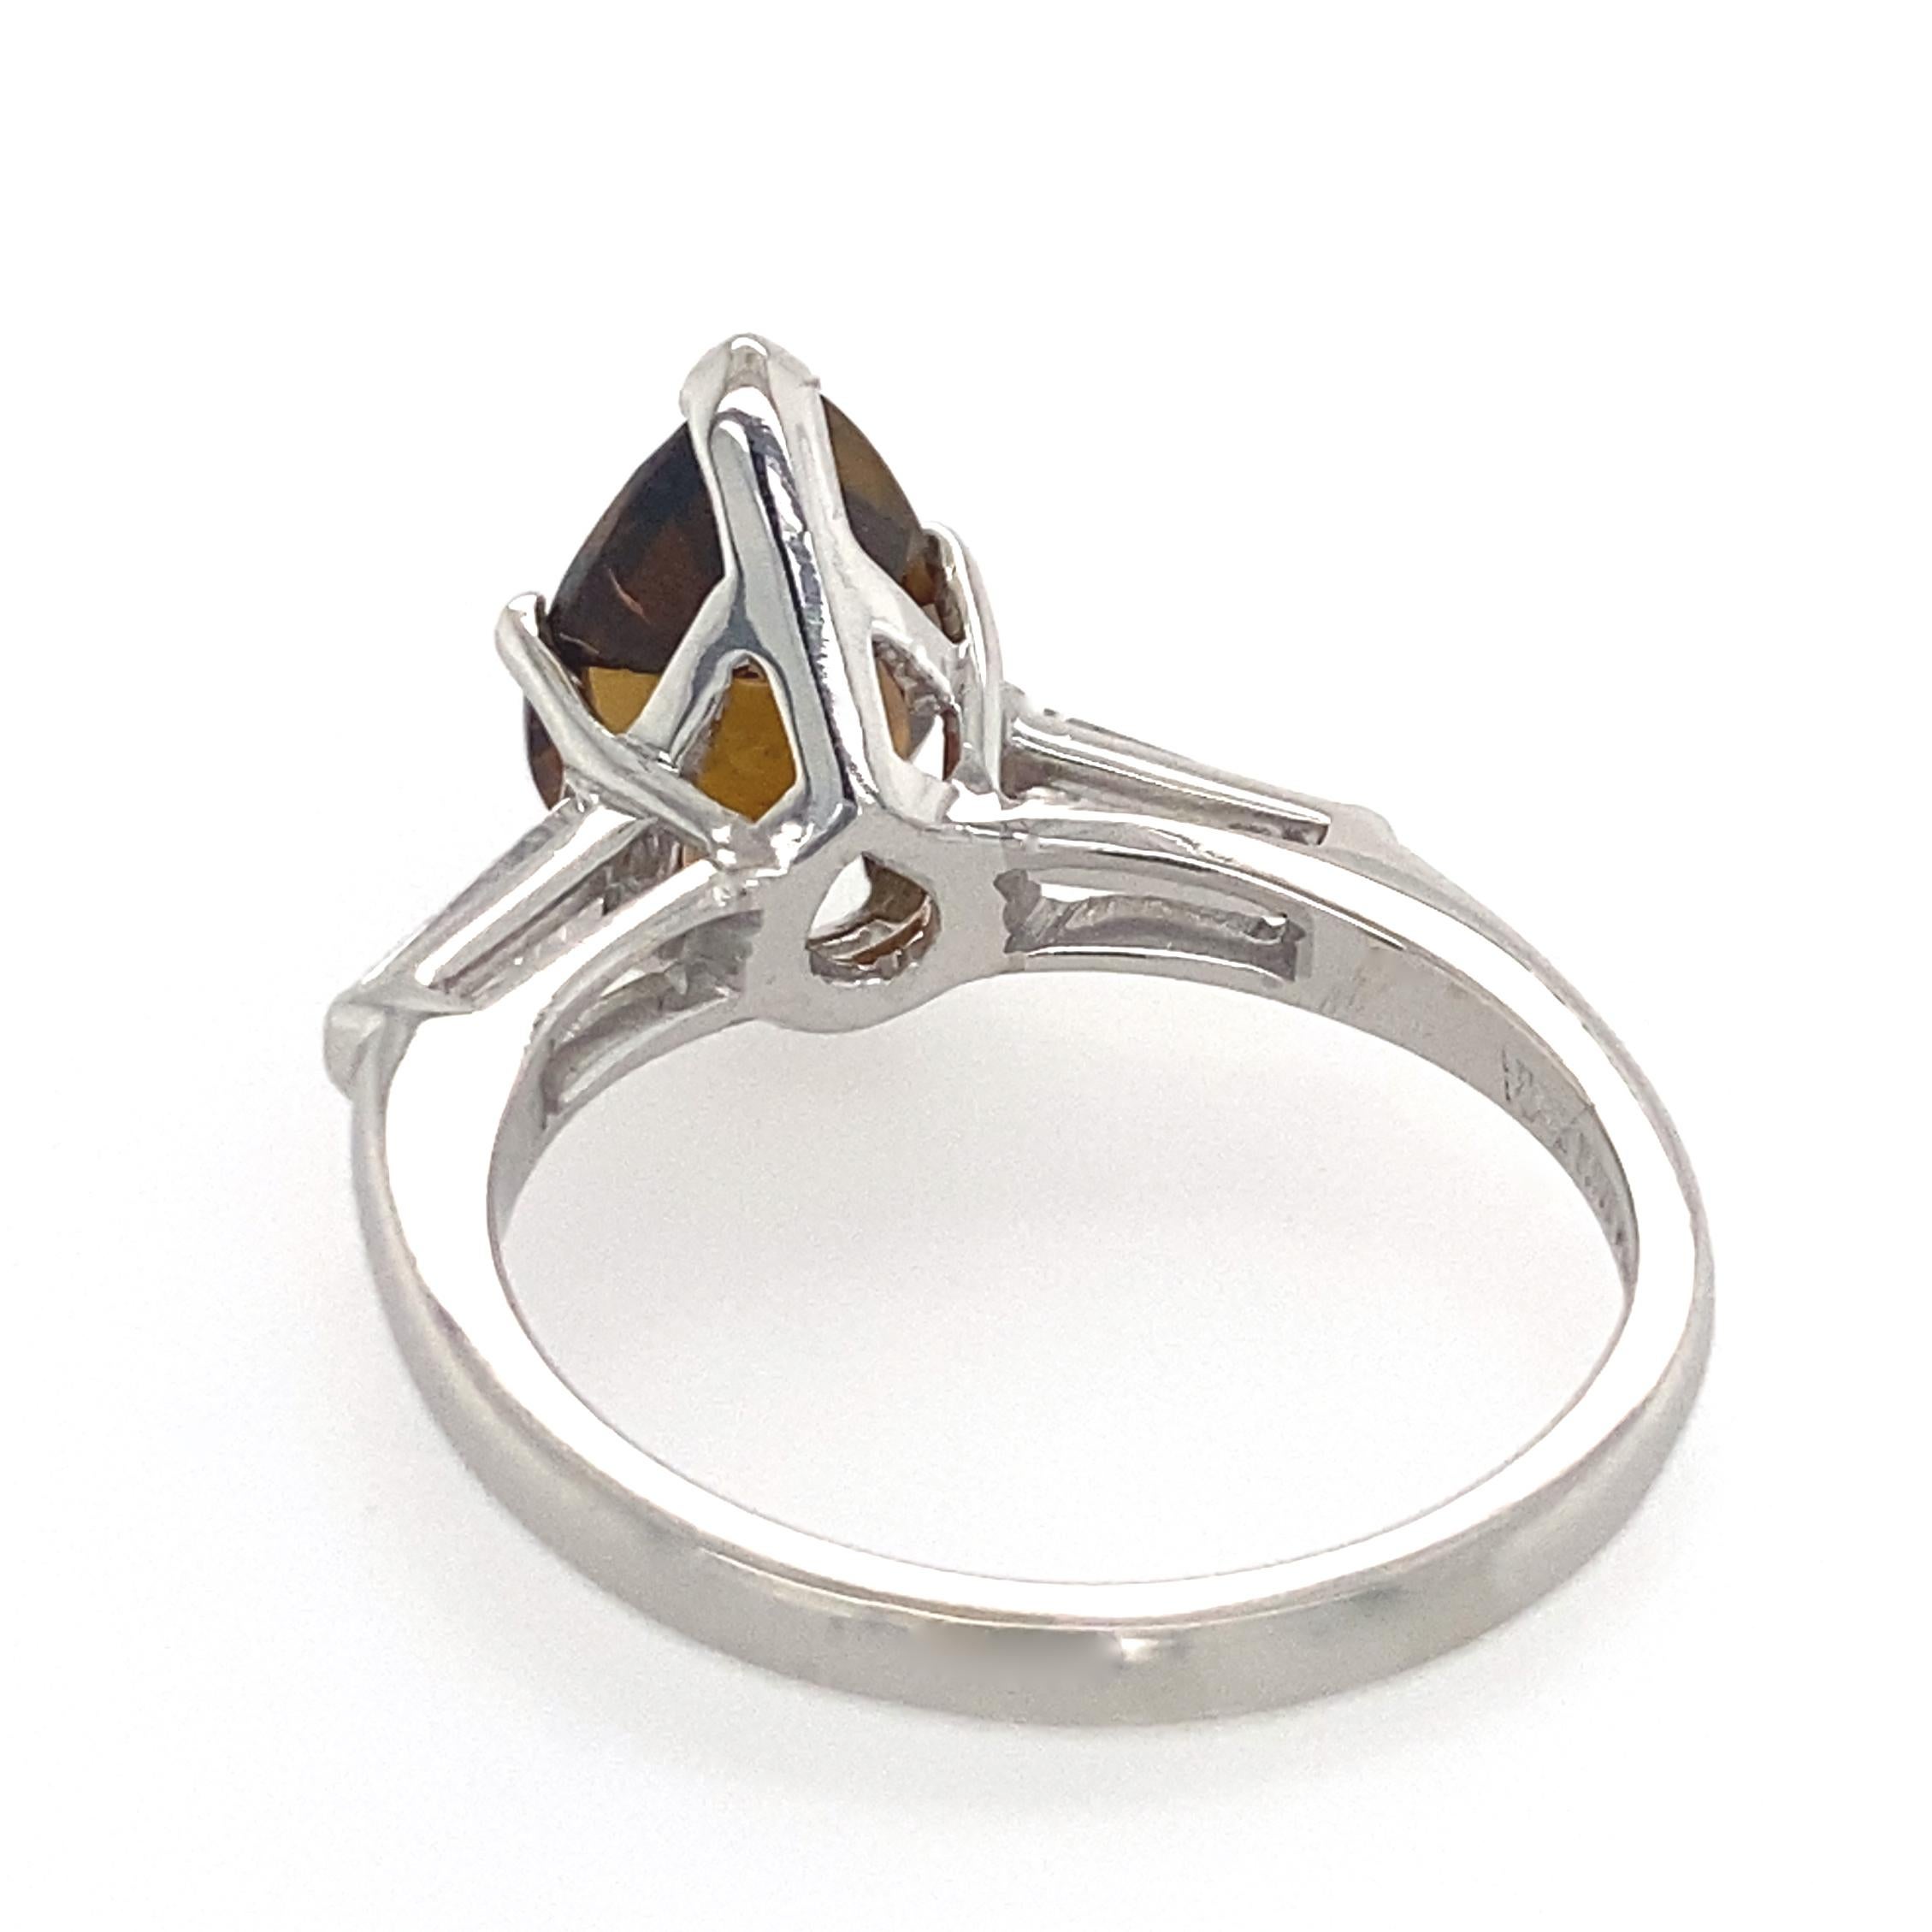 Women's Platinum 3-Stone Ring with Long Diamond Baguettes & Brown Tourmaline Pear